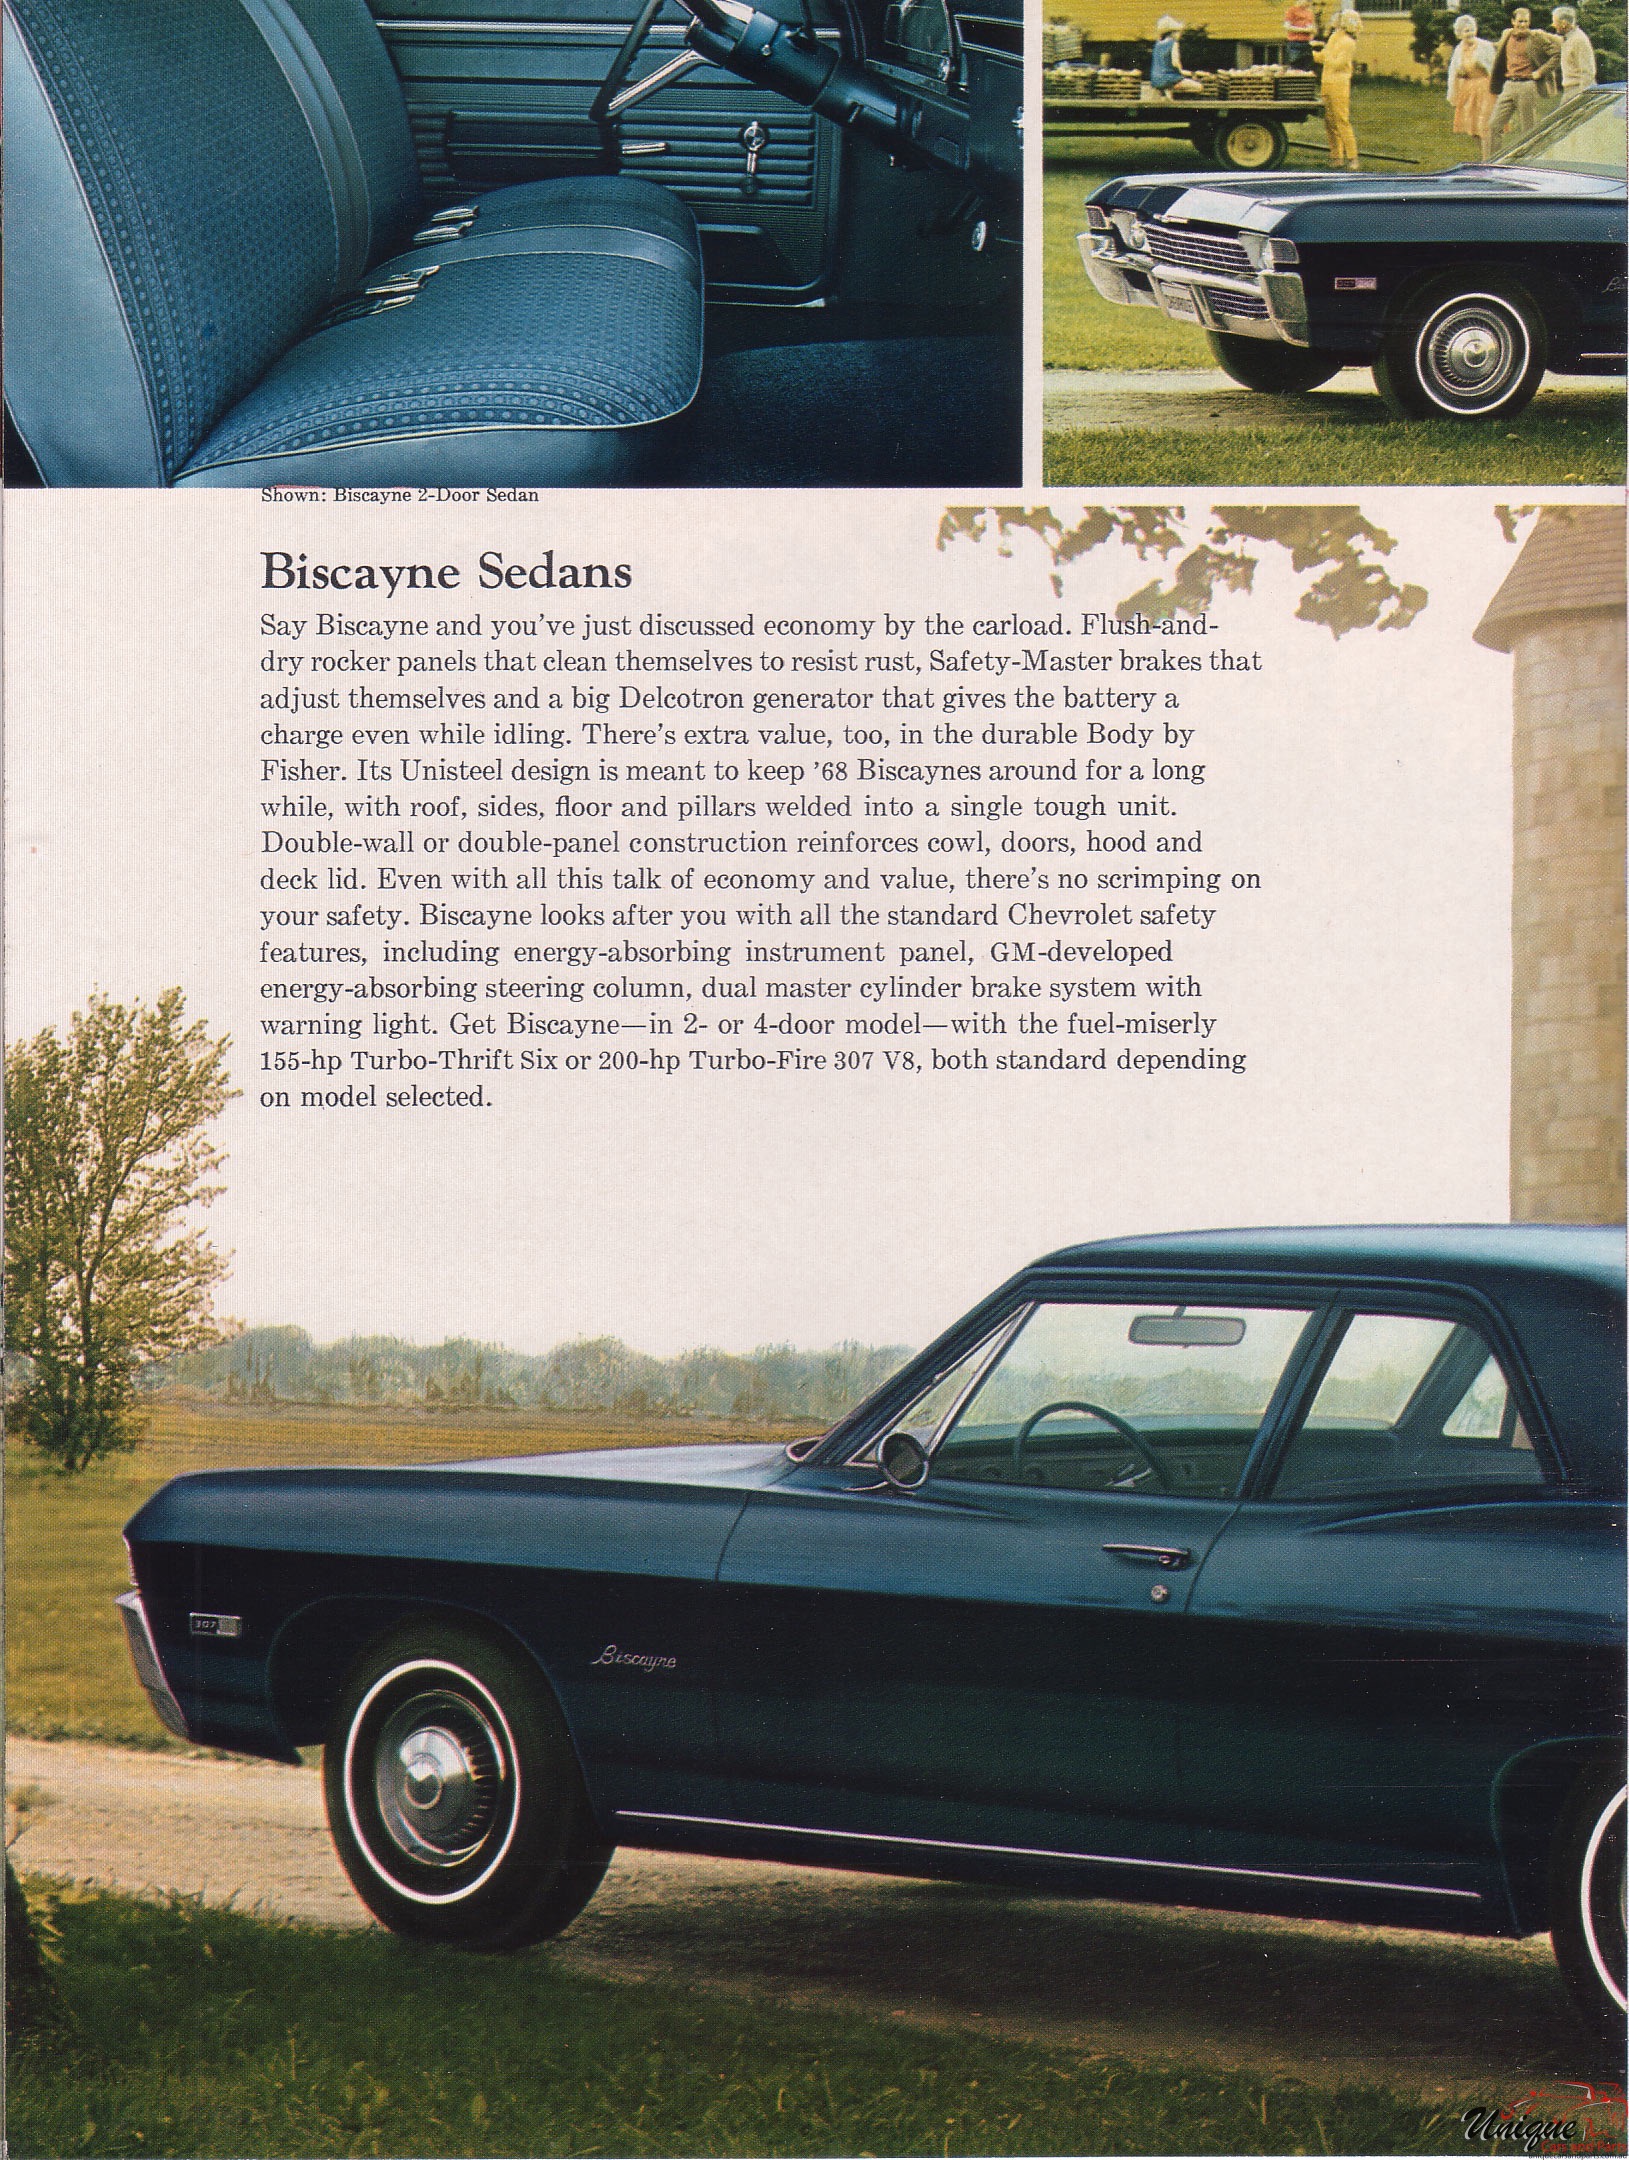 1968 Chevrolet Full-Size Brochure Page 9